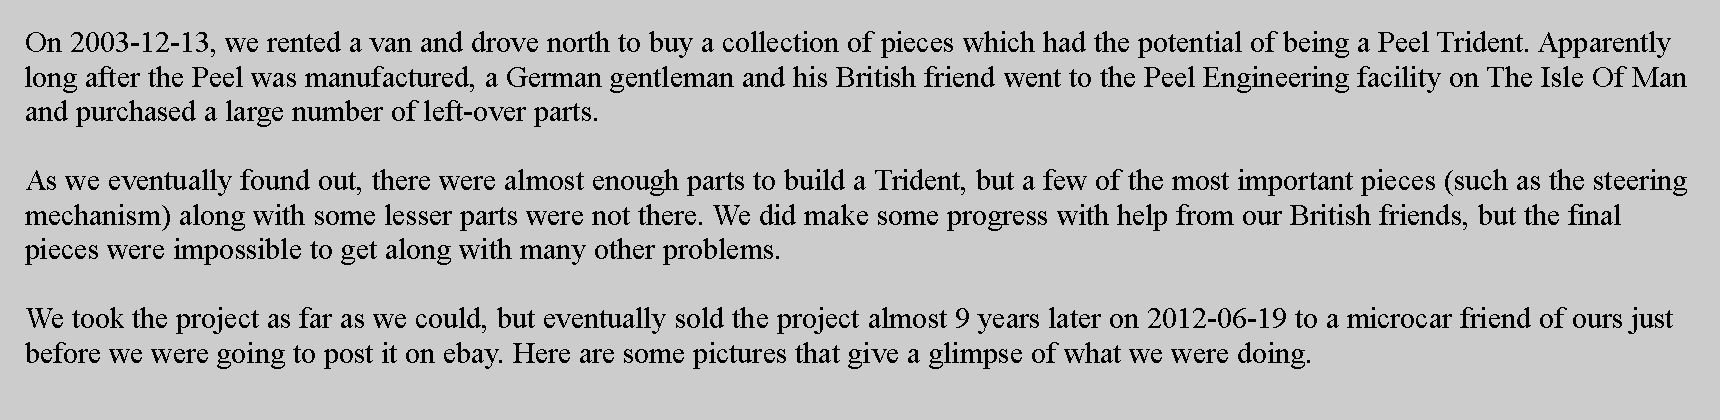 Text Box: On 2003-12-13, we rented a van and drove north to buy a collection of pieces which had the potential of being a Peel Trident. Apparently long after the Peel was manufactured, a German gentleman and his British friend went to the Peel Engineering facility on The Isle Of Man and purchased a large number of left-over parts.As we eventually found out, there were almost enough parts to build a Trident, but a few of the most important pieces (such as the steering mechanism) along with some lesser parts were not there. We did make some progress with help from our British friends, but the final pieces were impossible to get along with many other problems.We took the project as far as we could, but eventually sold the project almost 9 years later on 2012-06-19 to a microcar friend of ours just before we were going to post it on ebay. Here are some pictures that give a glimpse of what we were doing.